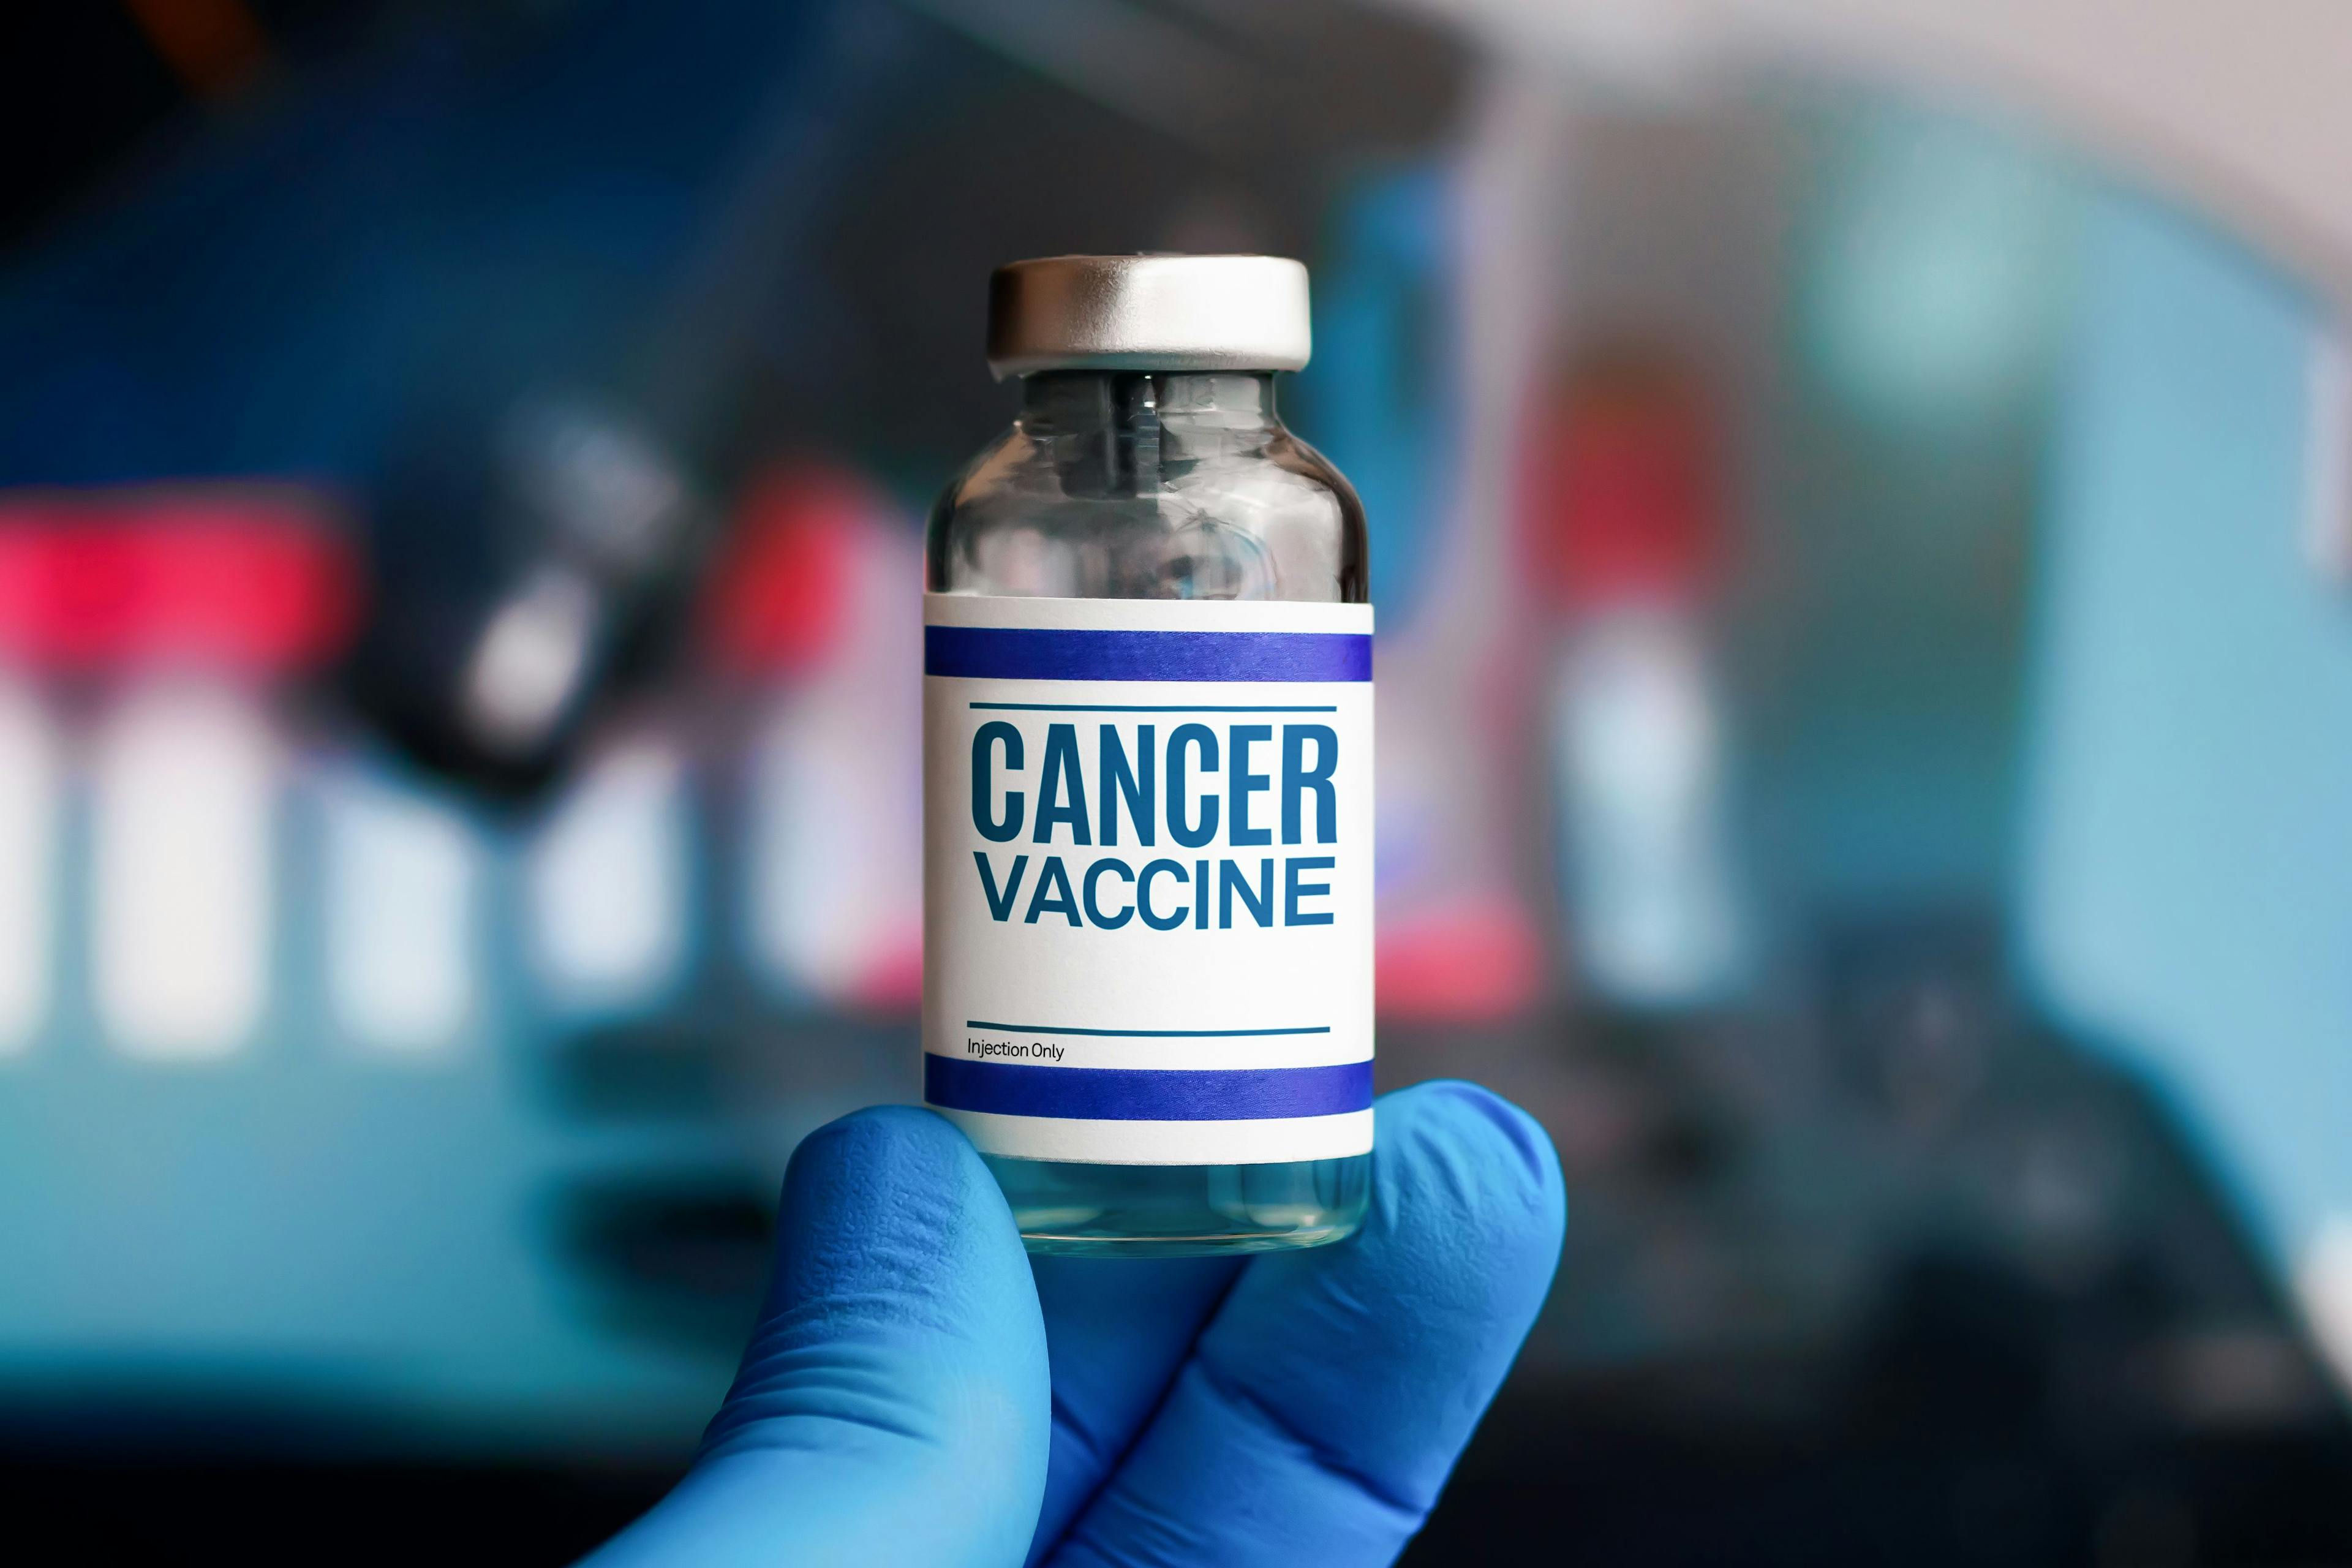 Image of a person holding a cancer vaccine vial.